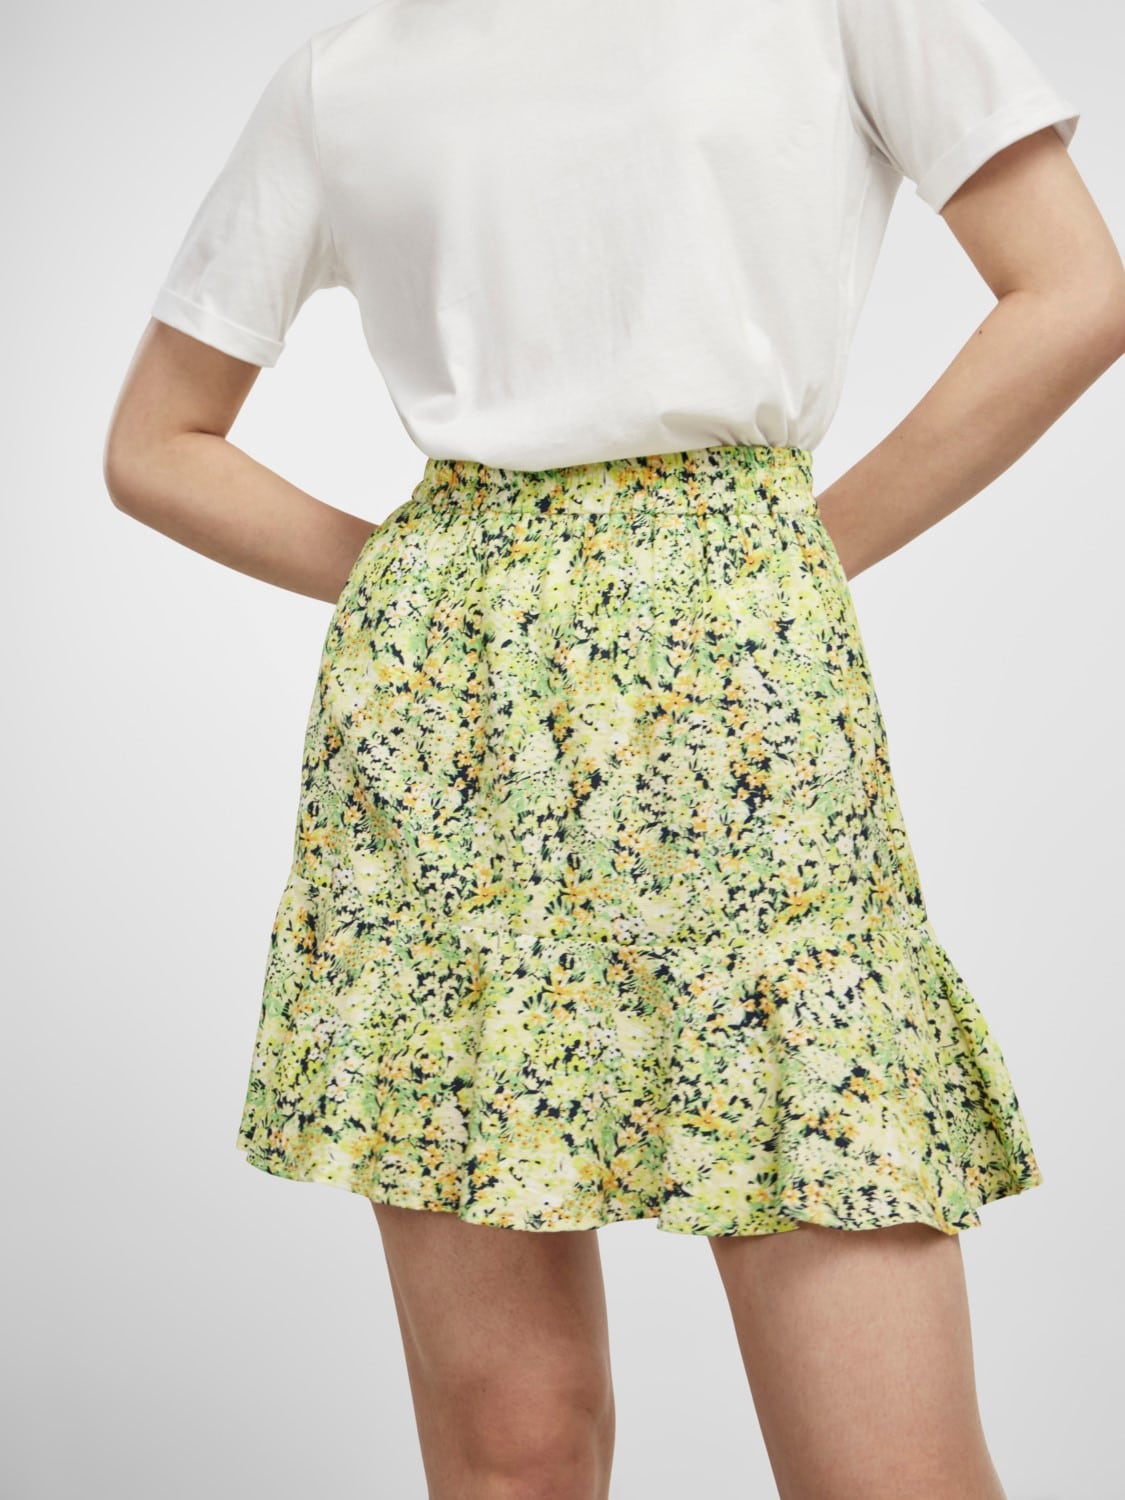 Bruna Skirt - Flower Tender Shoots - Out and About